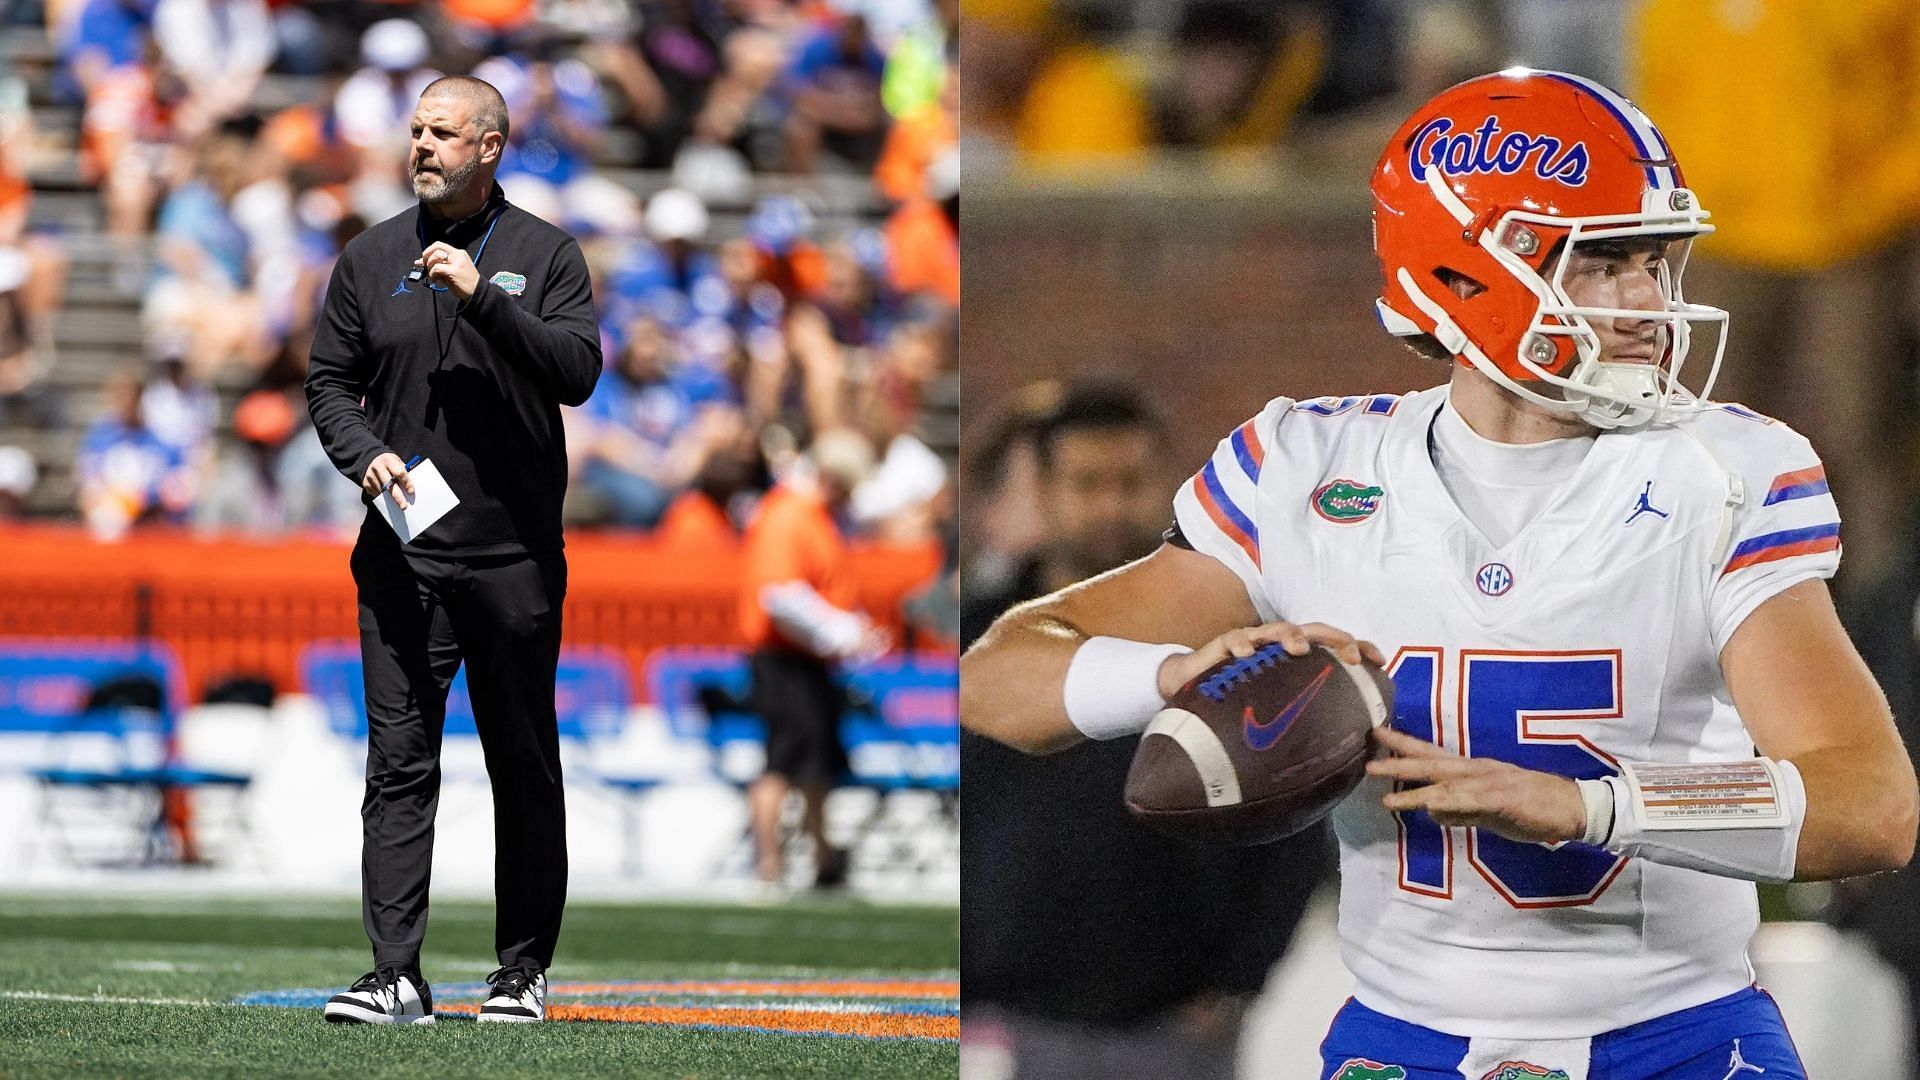 Florida head coach Billy Napier and quarterback Graham Mertz will have a difficult path to the CFB Playoff